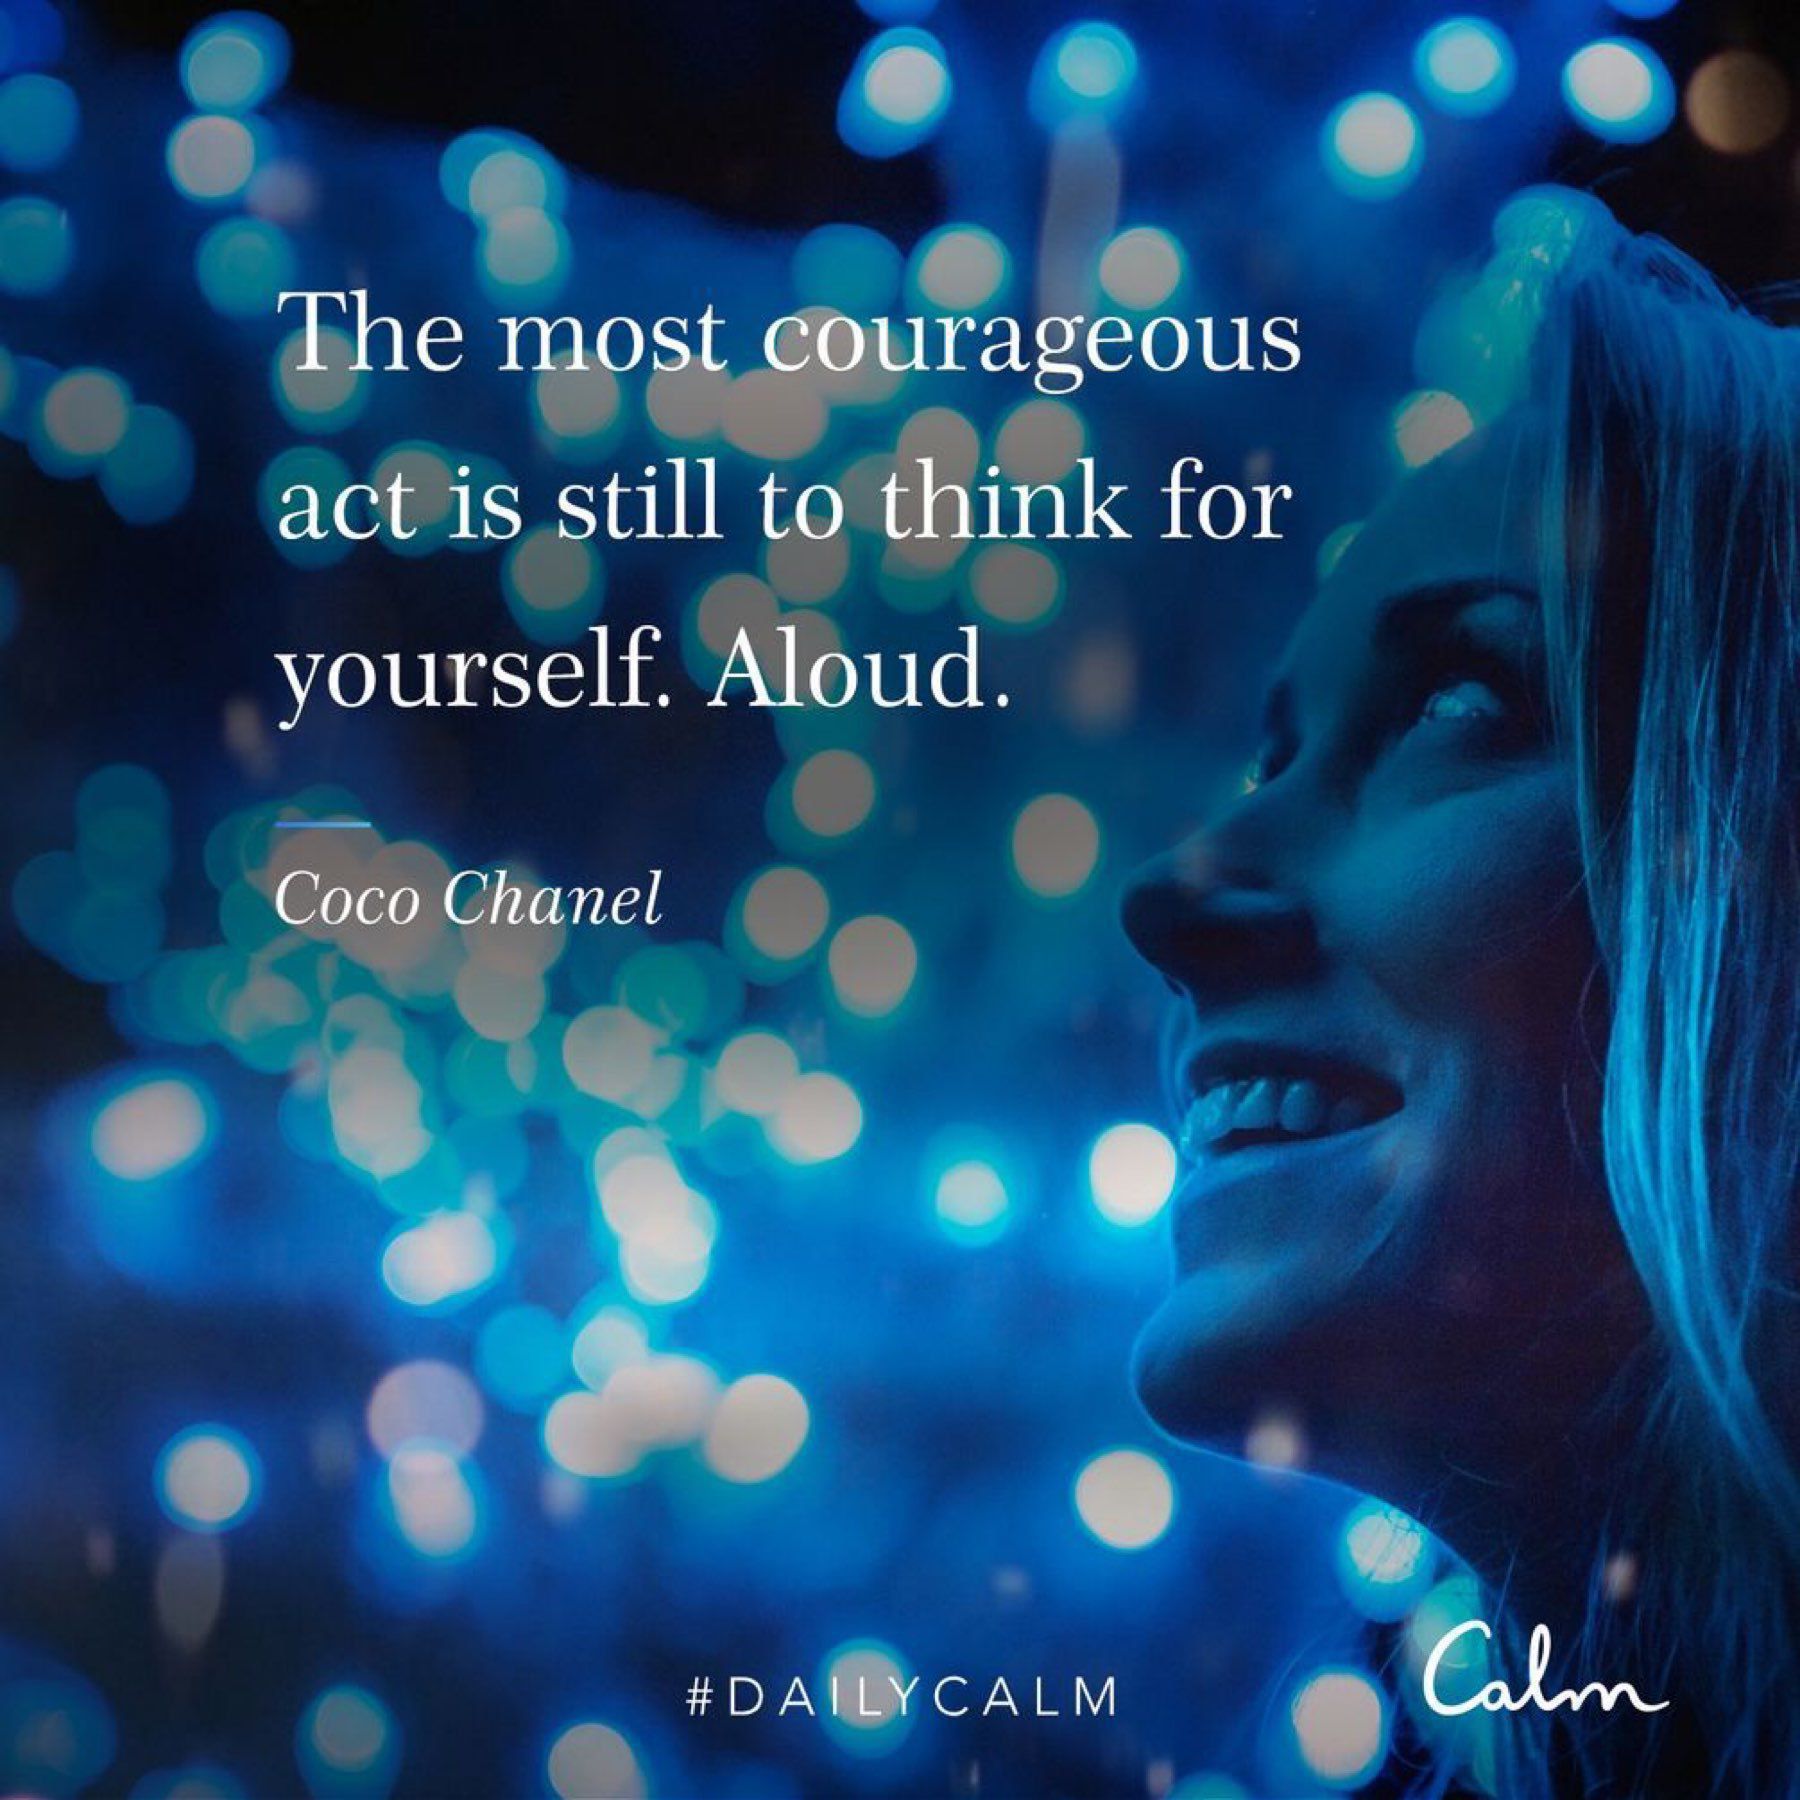 Thinking for yourself is courageous